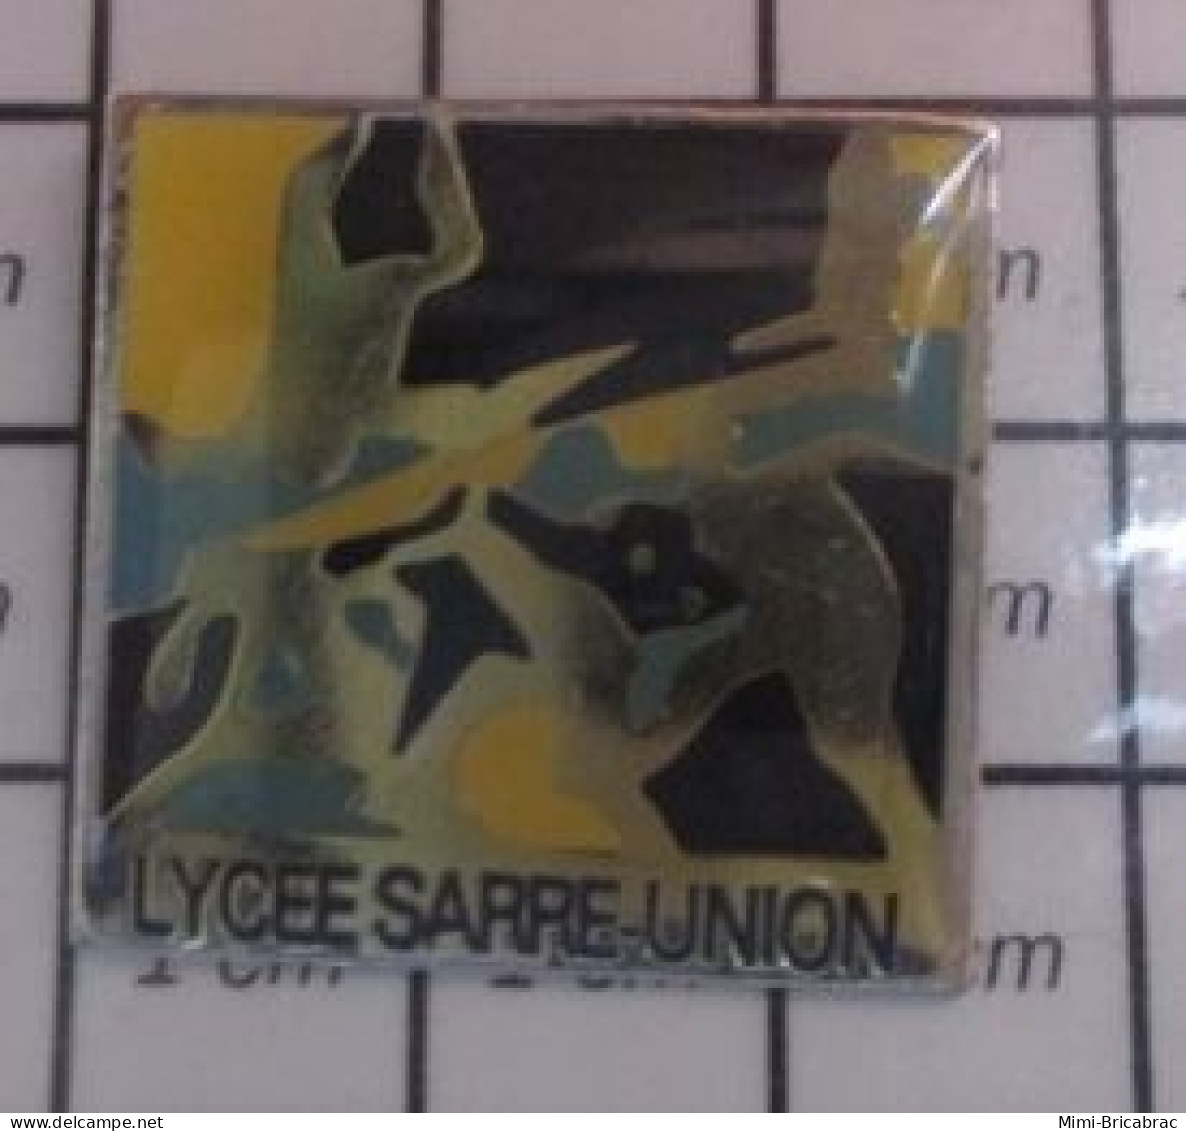 713c Pin's Pins / Beau Et Rare / ADMINISTRATIONS / LYCEE SARRE UNION - Administración